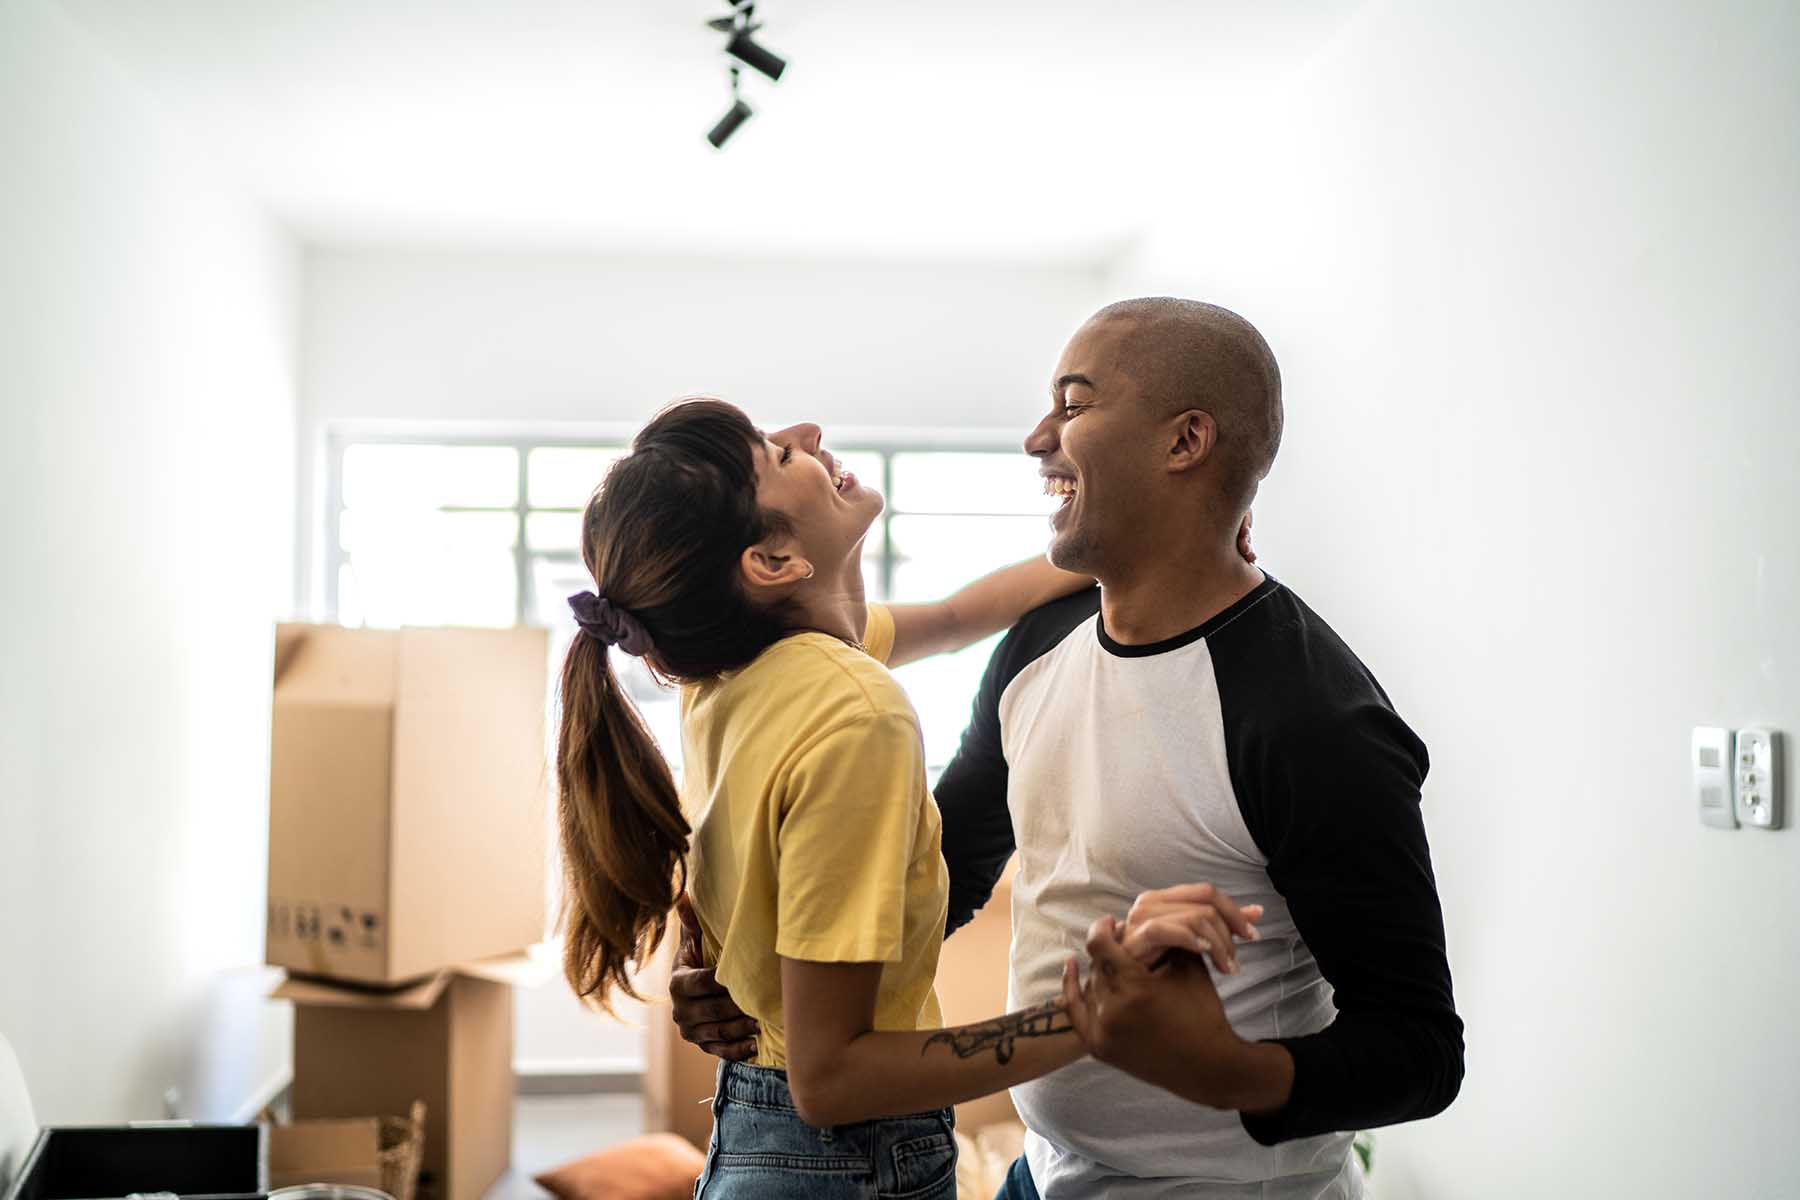 Couple laughing and dance-embracing in their new (empty) home. Moving boxes are visible in the background.